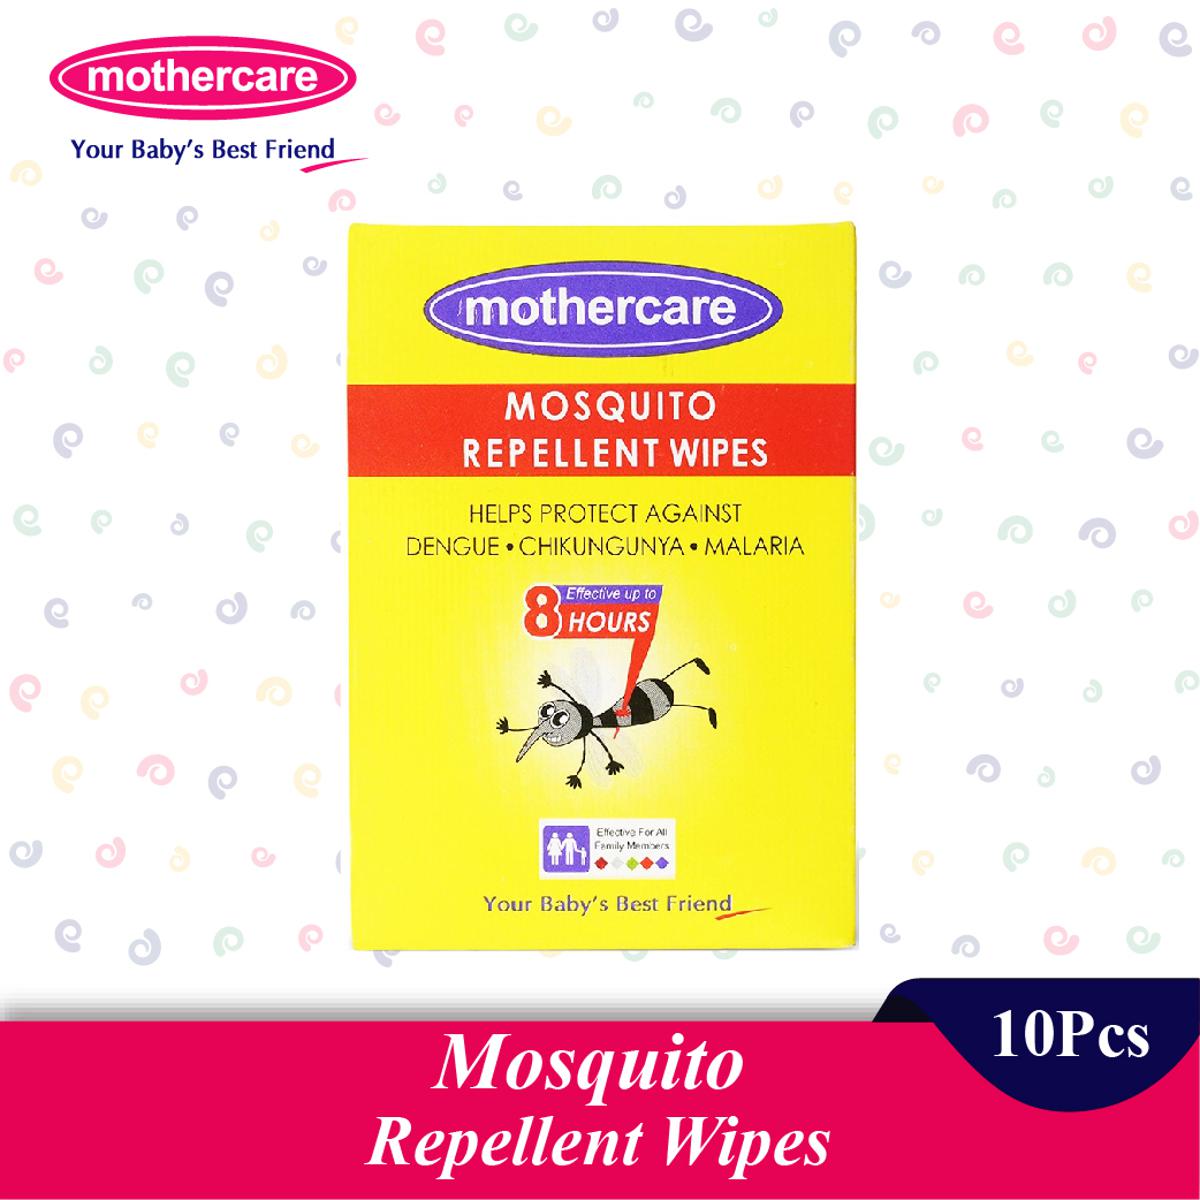 Mothercare  Mosquito Wipes / repellent wipes